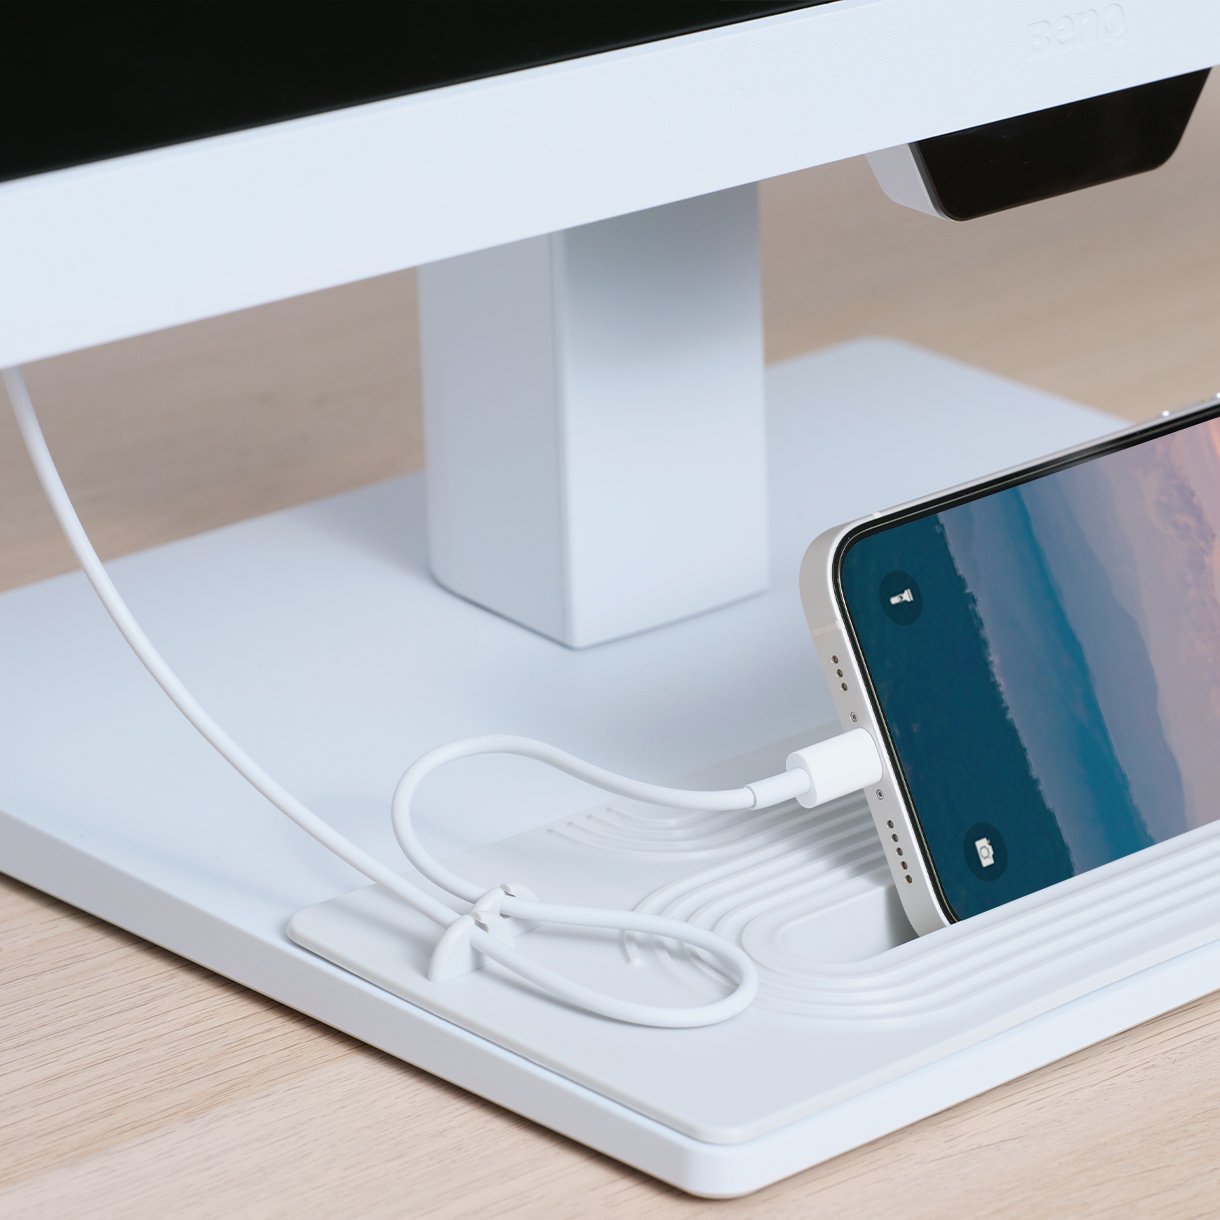 BenQ GW2790QT optional accessory base cover GC01 keeps your cords untangled and easy to use while the downstream USB-C™ port delivers data and power to your phone.